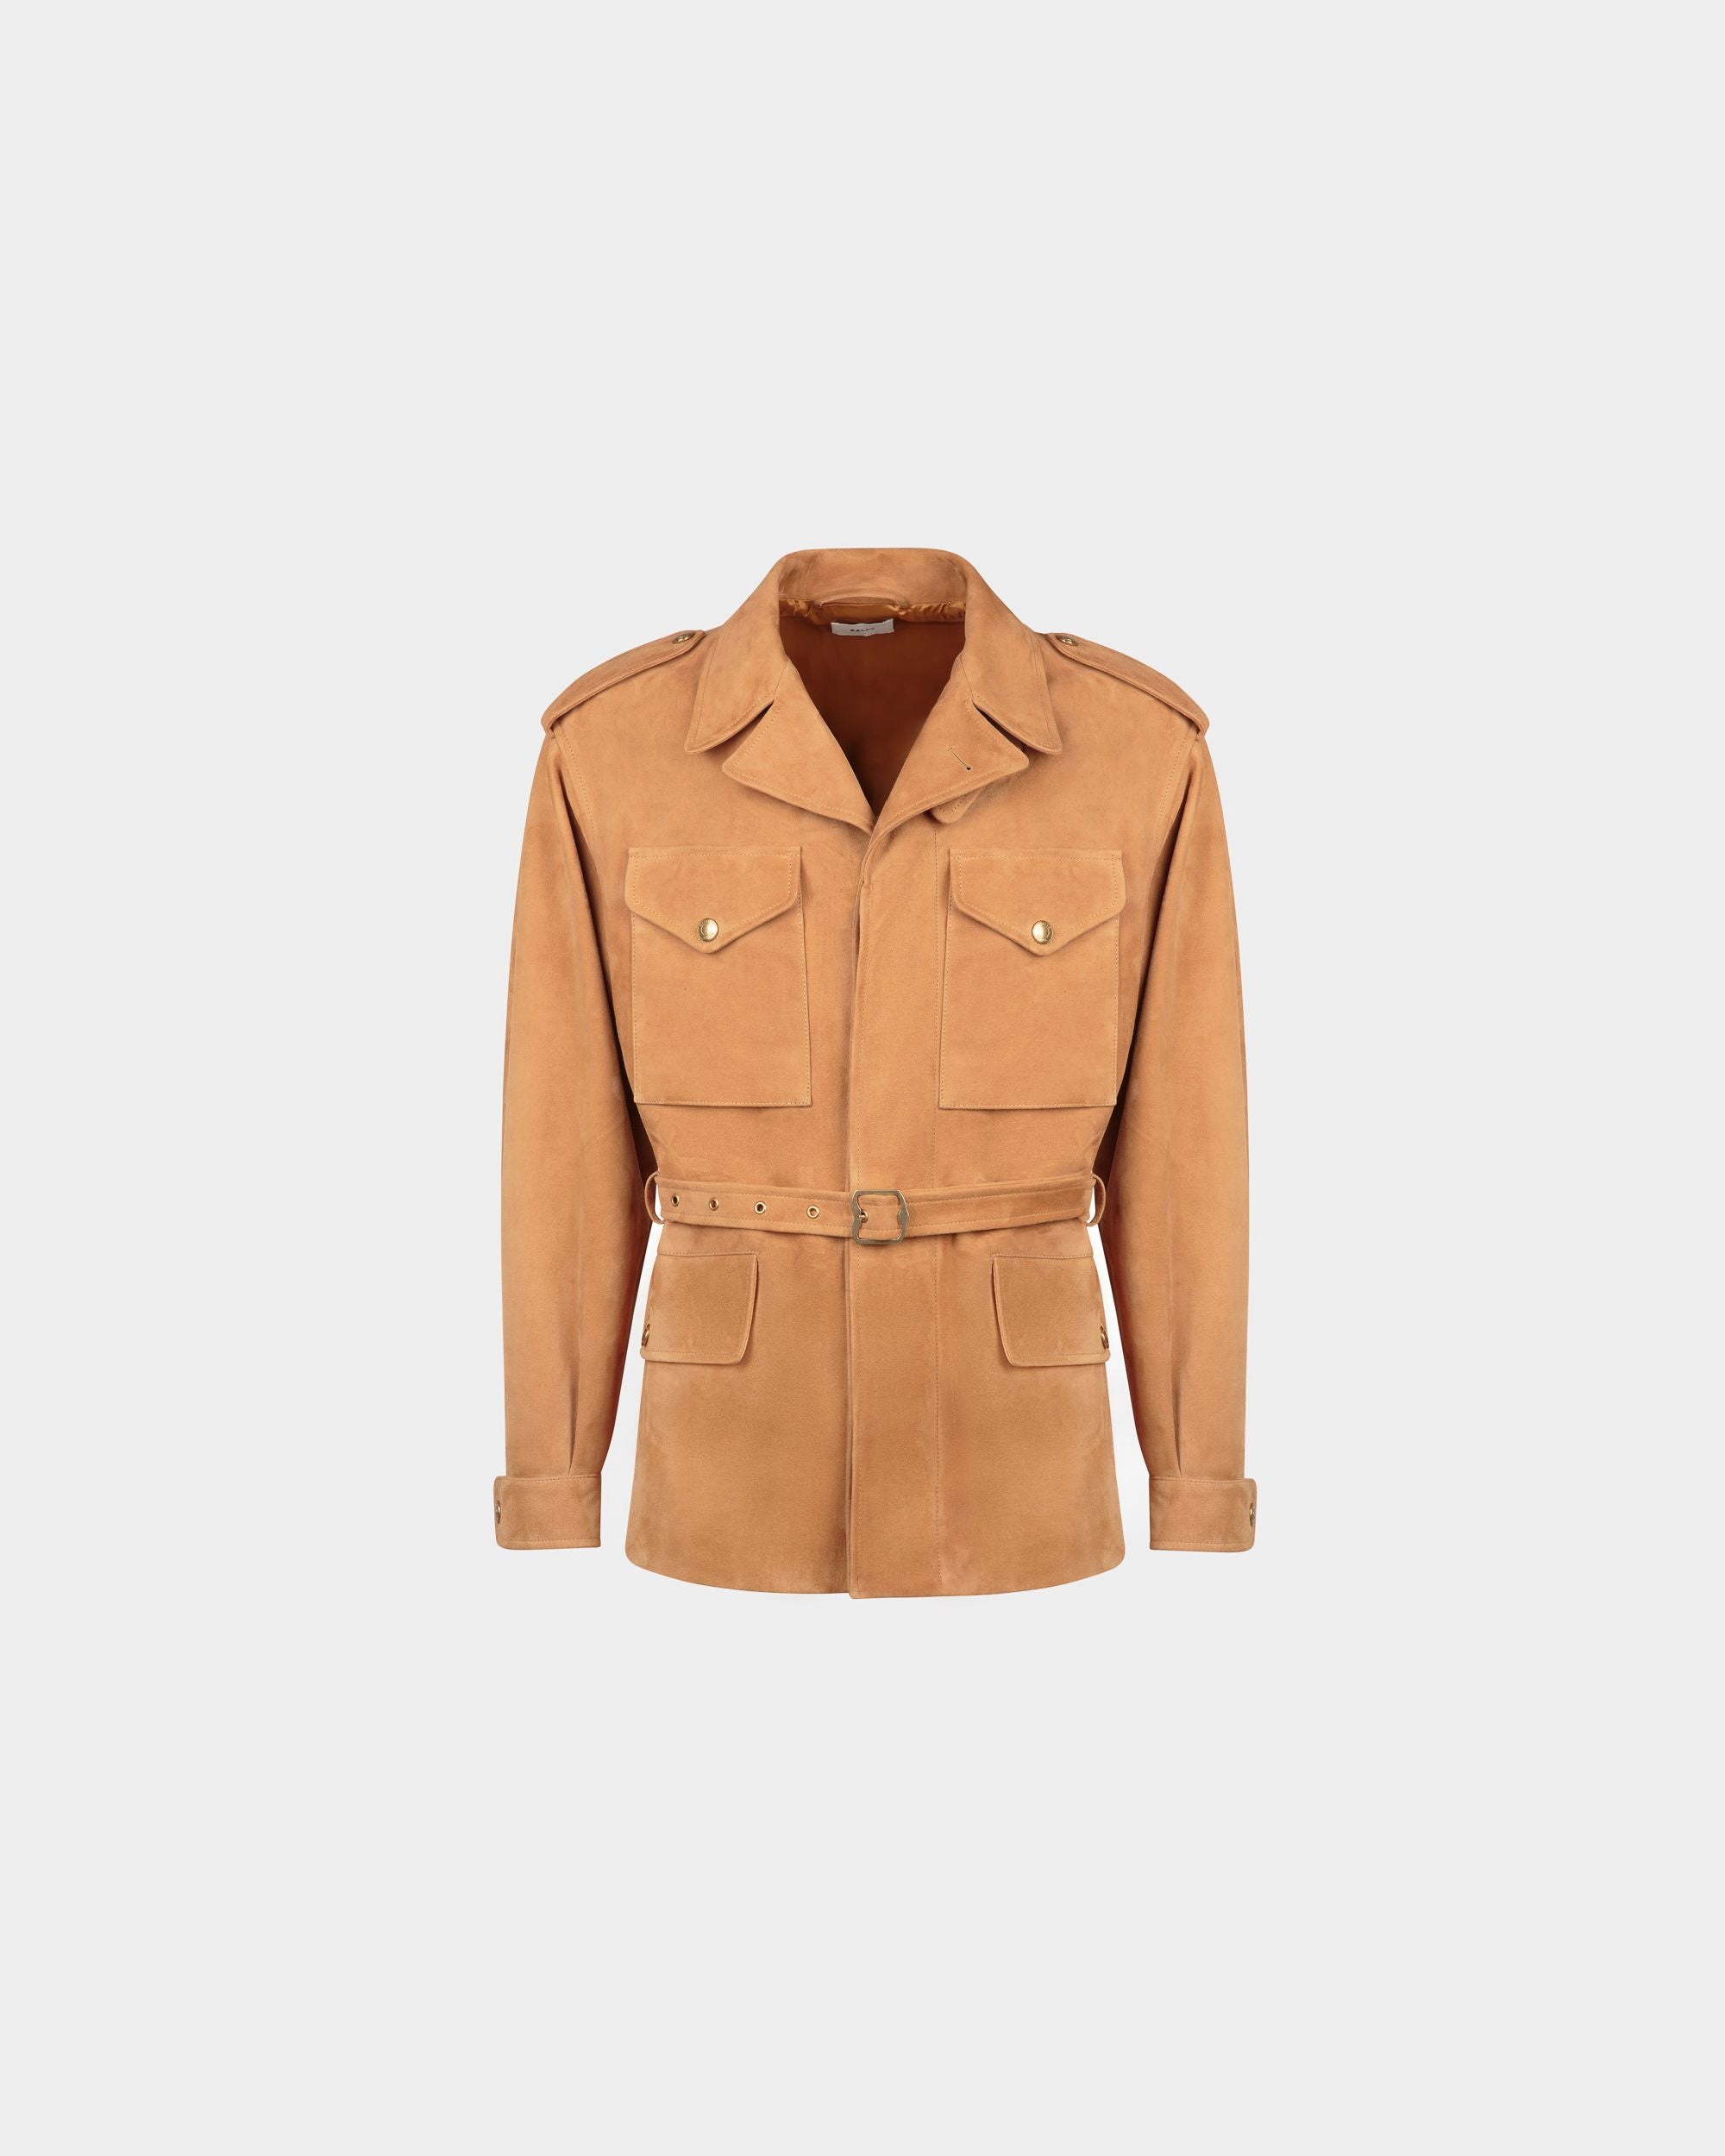 Men's Jacket in Brown Suede | Bally | Still Life Front